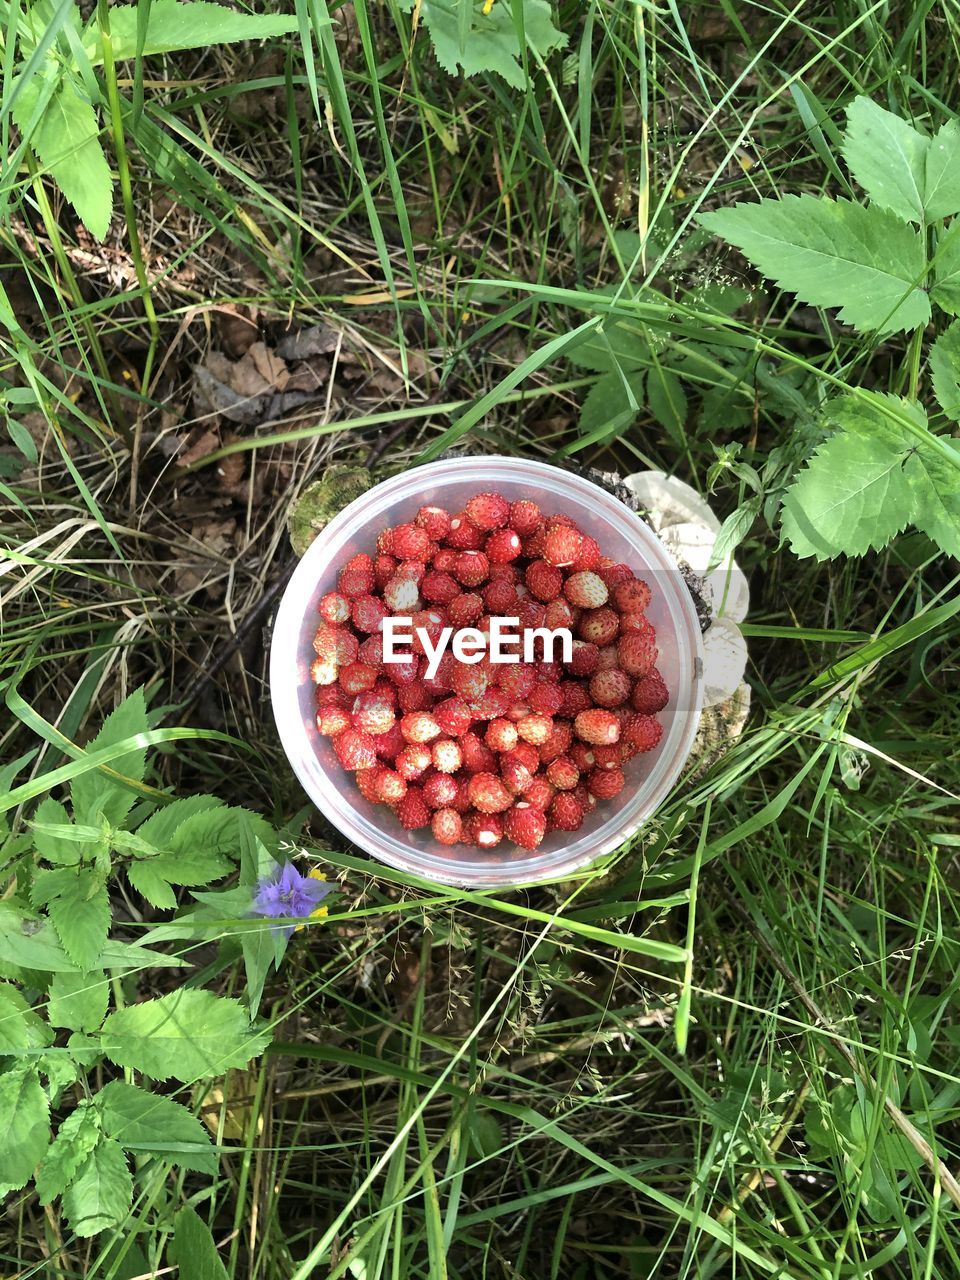 HIGH ANGLE VIEW OF STRAWBERRIES IN BOWL ON GRASS